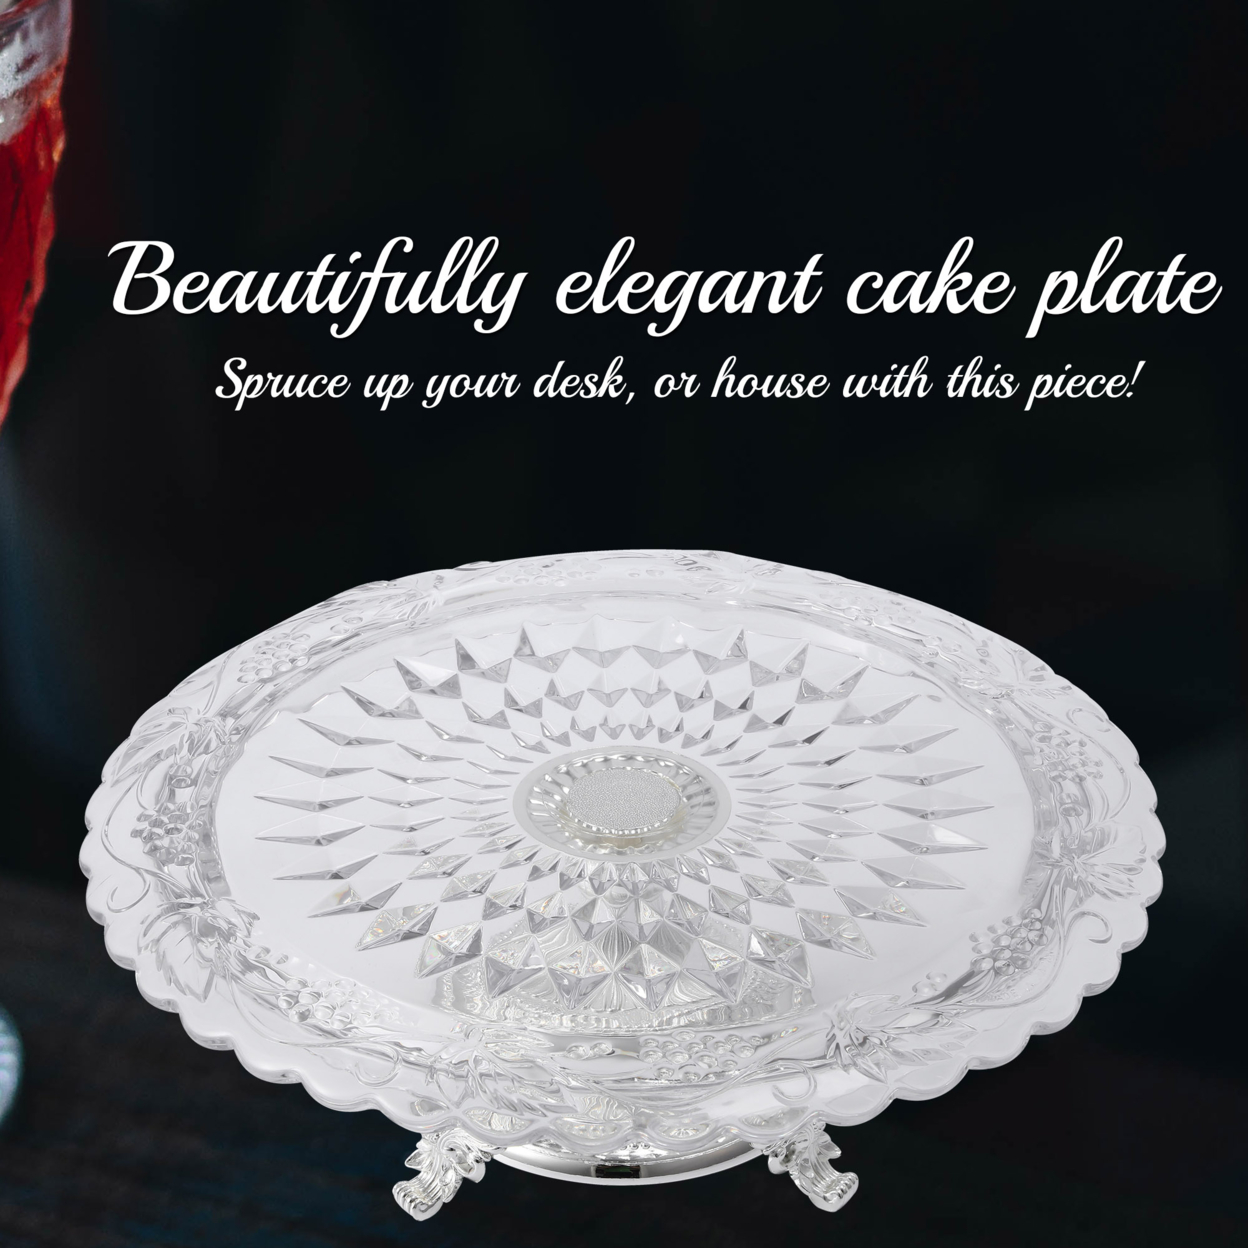 Matashi Glass Etched Cake Plate Centerpiece, Round Serving Platter W Silver Plated Pedestal Base For Weddings, Parties, Tabletop Stand